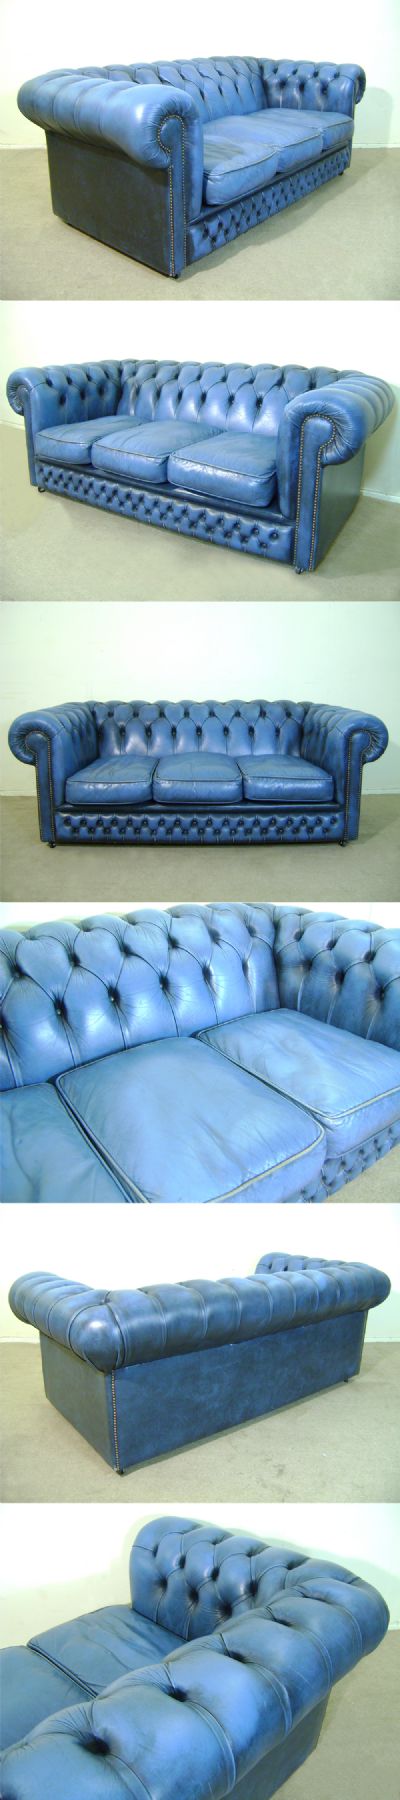 A blue leather chesterfield sofa, c1970s. A really unusual and vibrant blue with excellent patination and mottled sides.